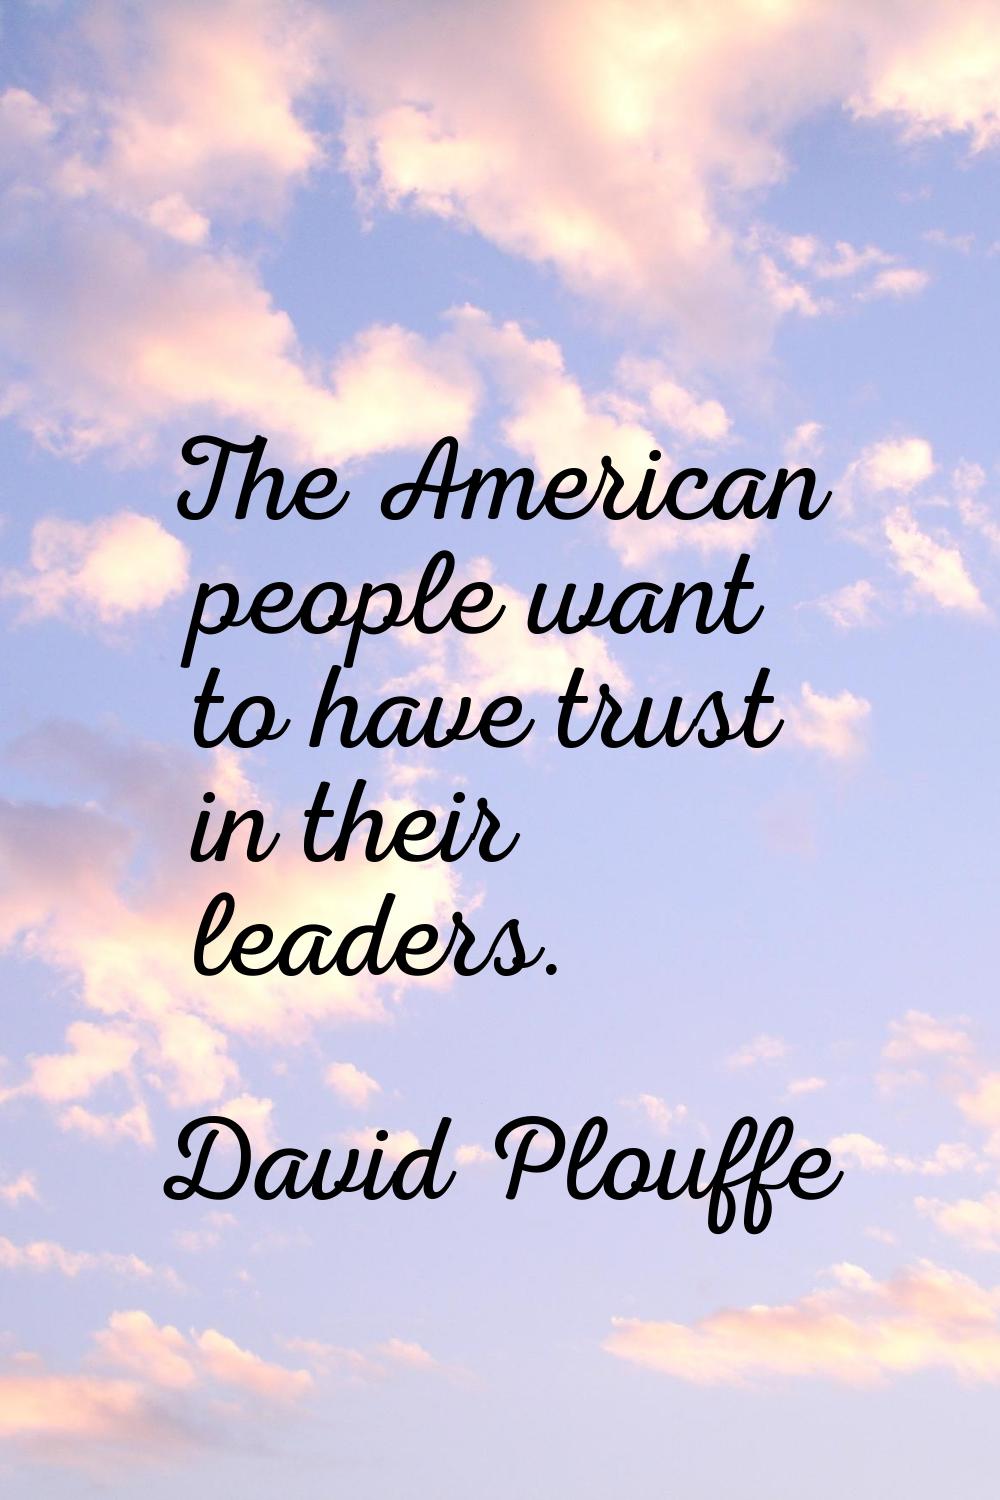 The American people want to have trust in their leaders.